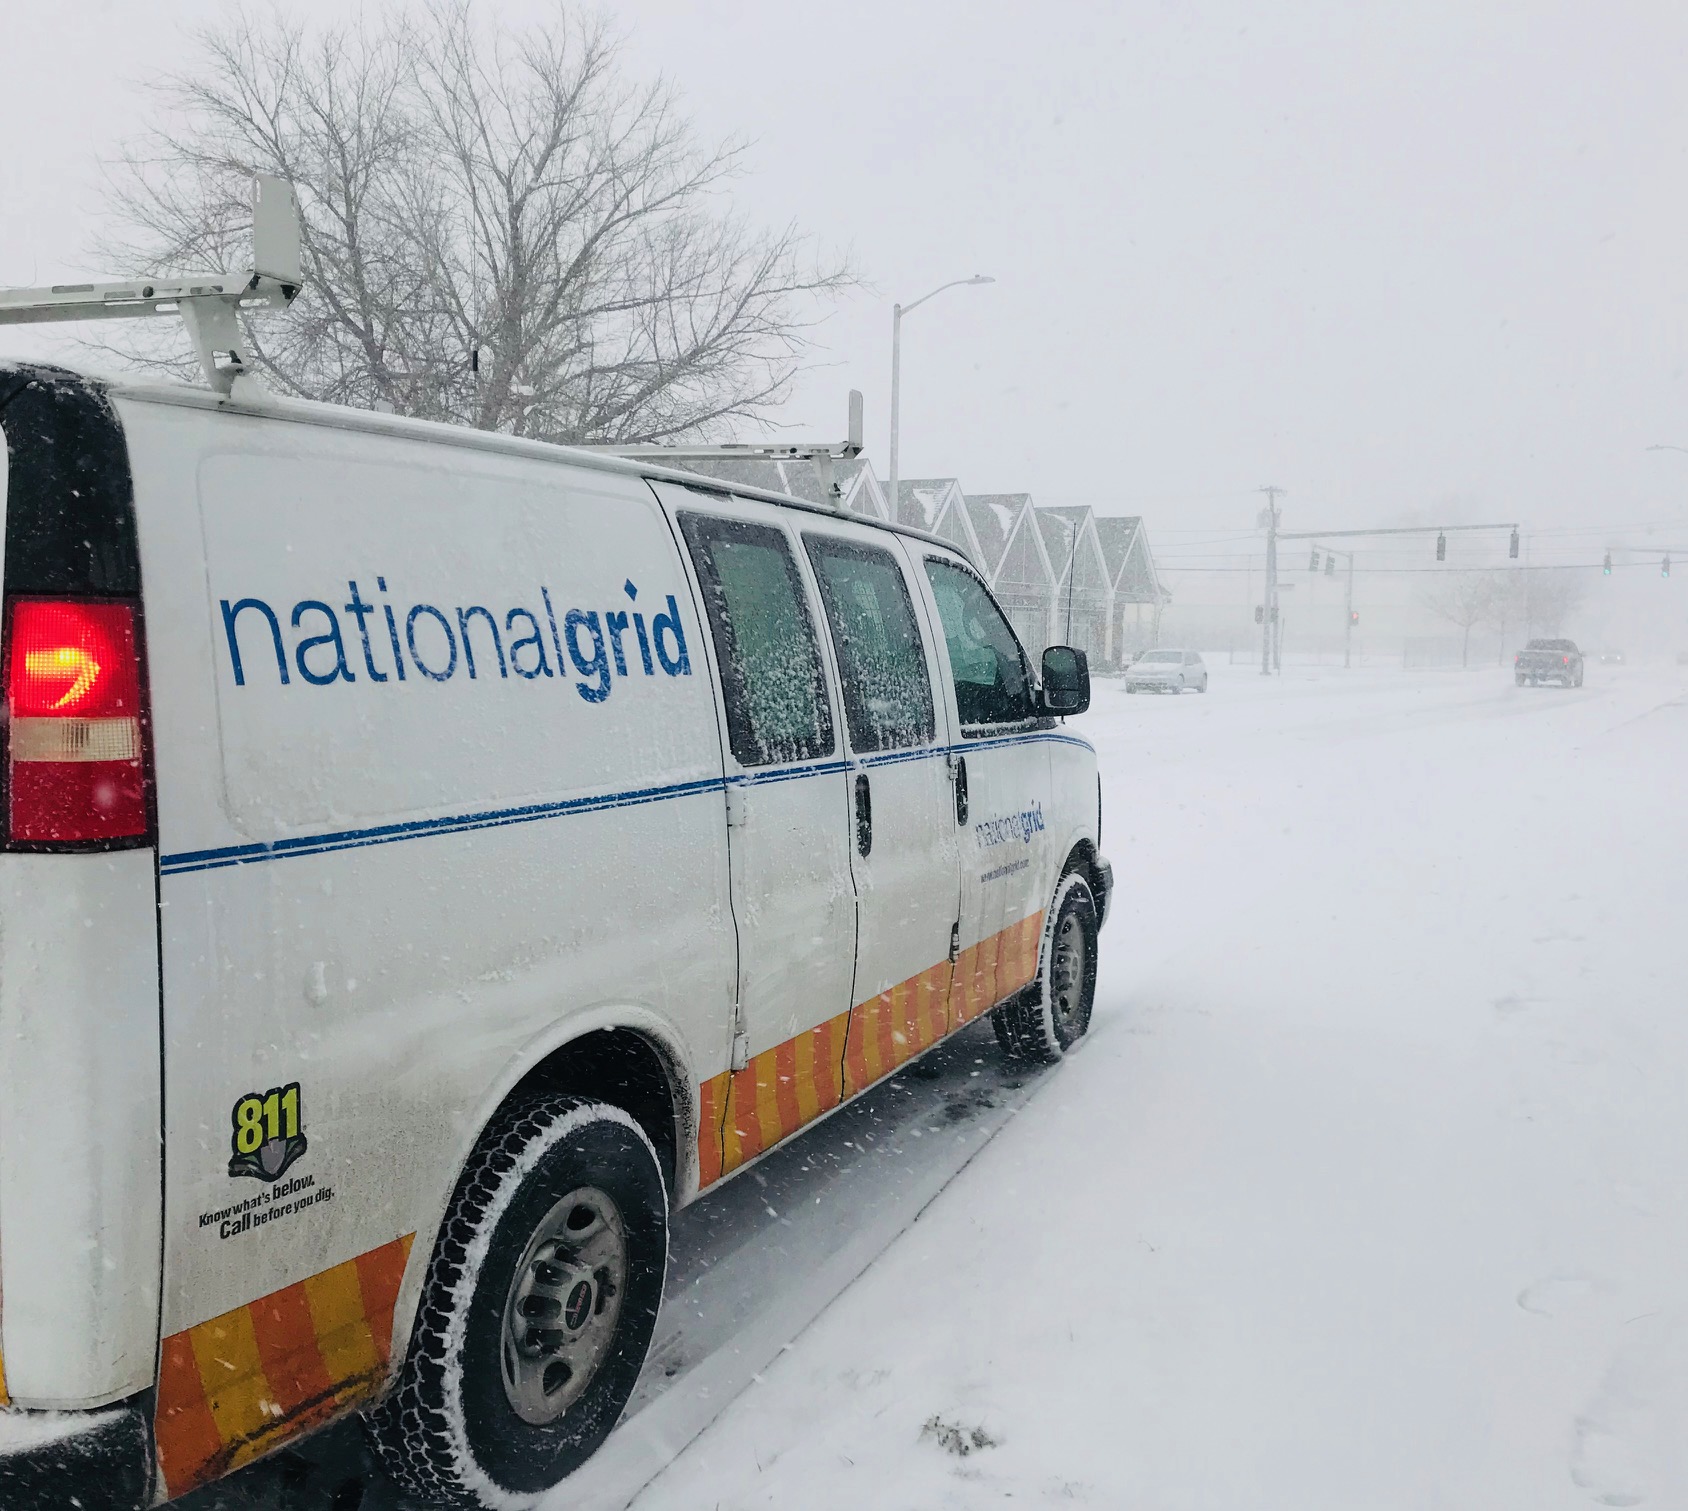 A NATIONAL GRID RHODE ISLAND van at Cranston and Bridgham streets in Providence. / PBN FILE PHOTO/ELI SHERMAN